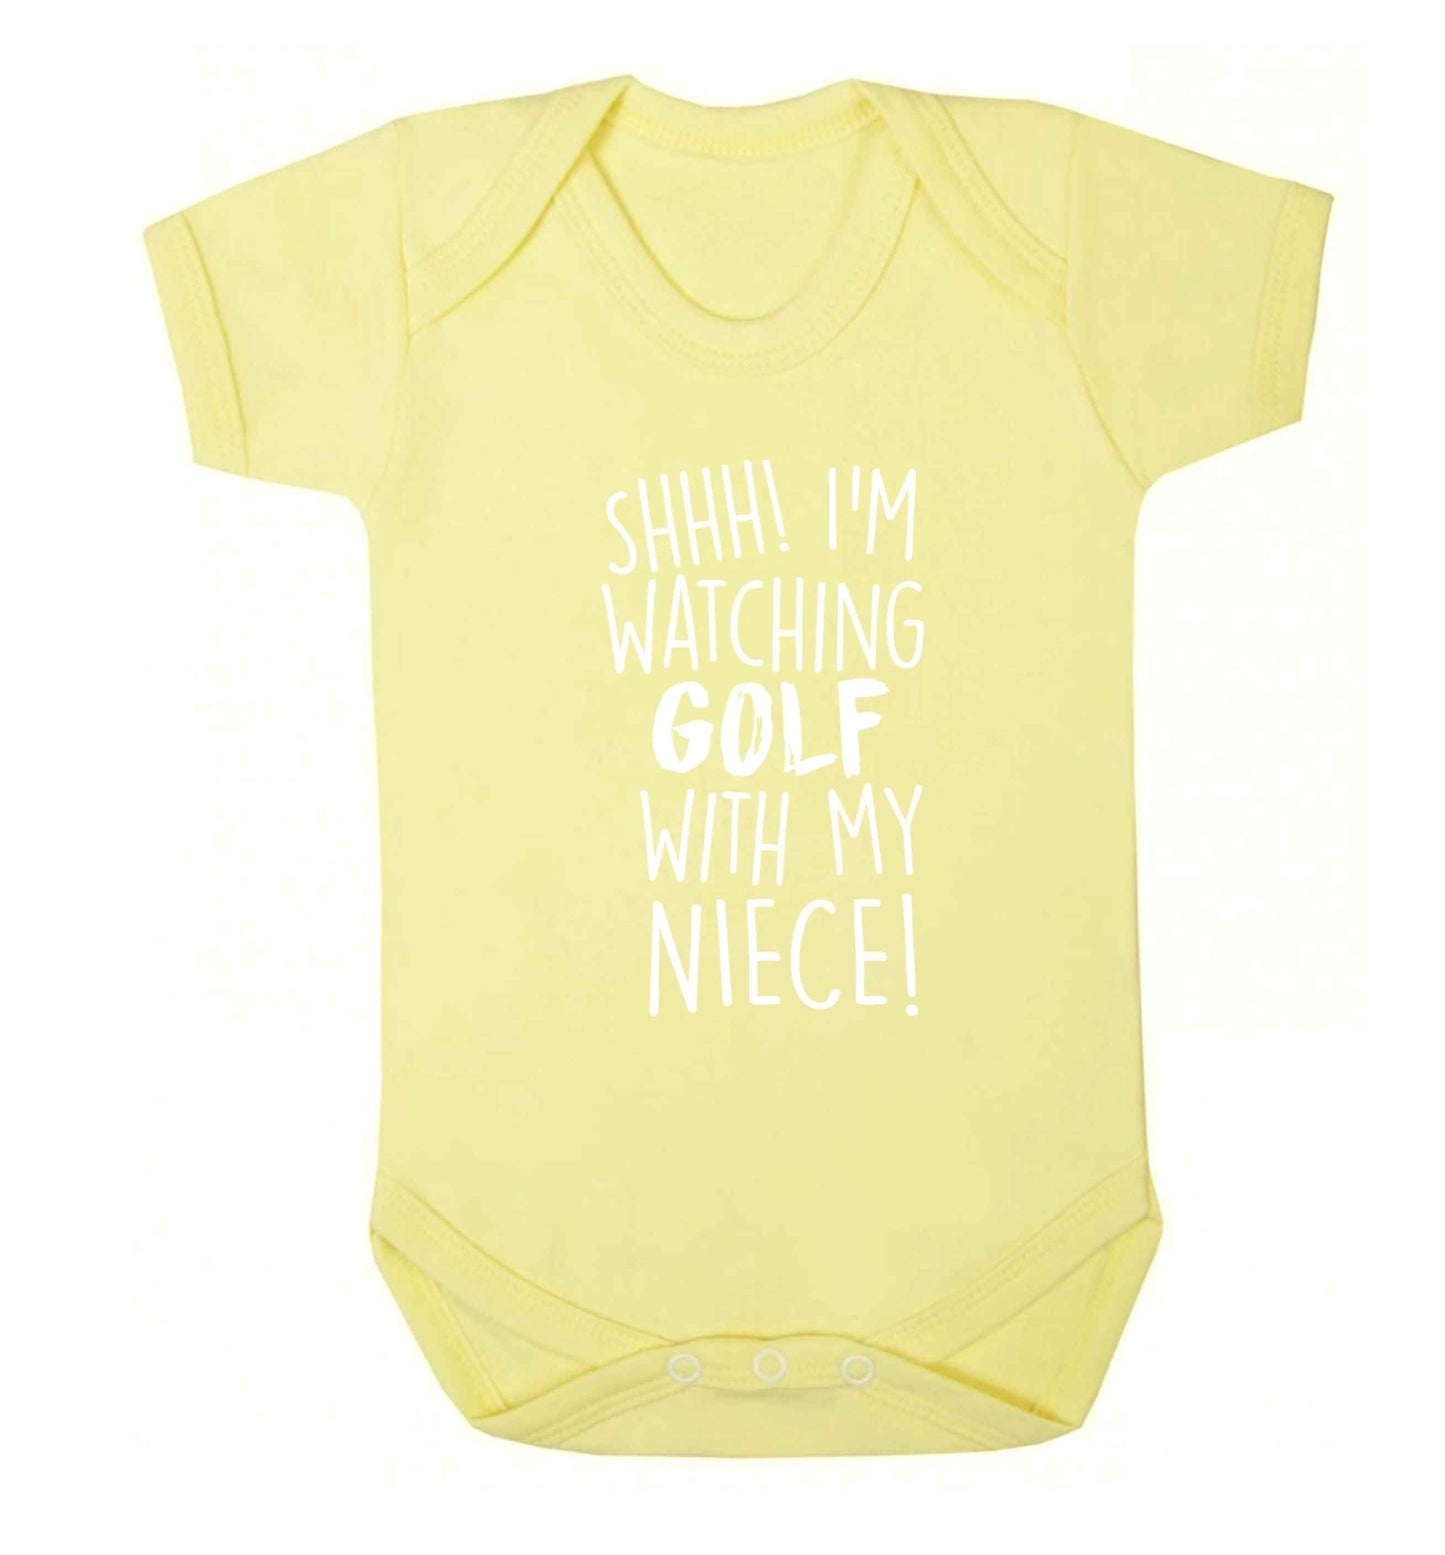 Shh I'm watching golf with my niece Baby Vest pale yellow 18-24 months